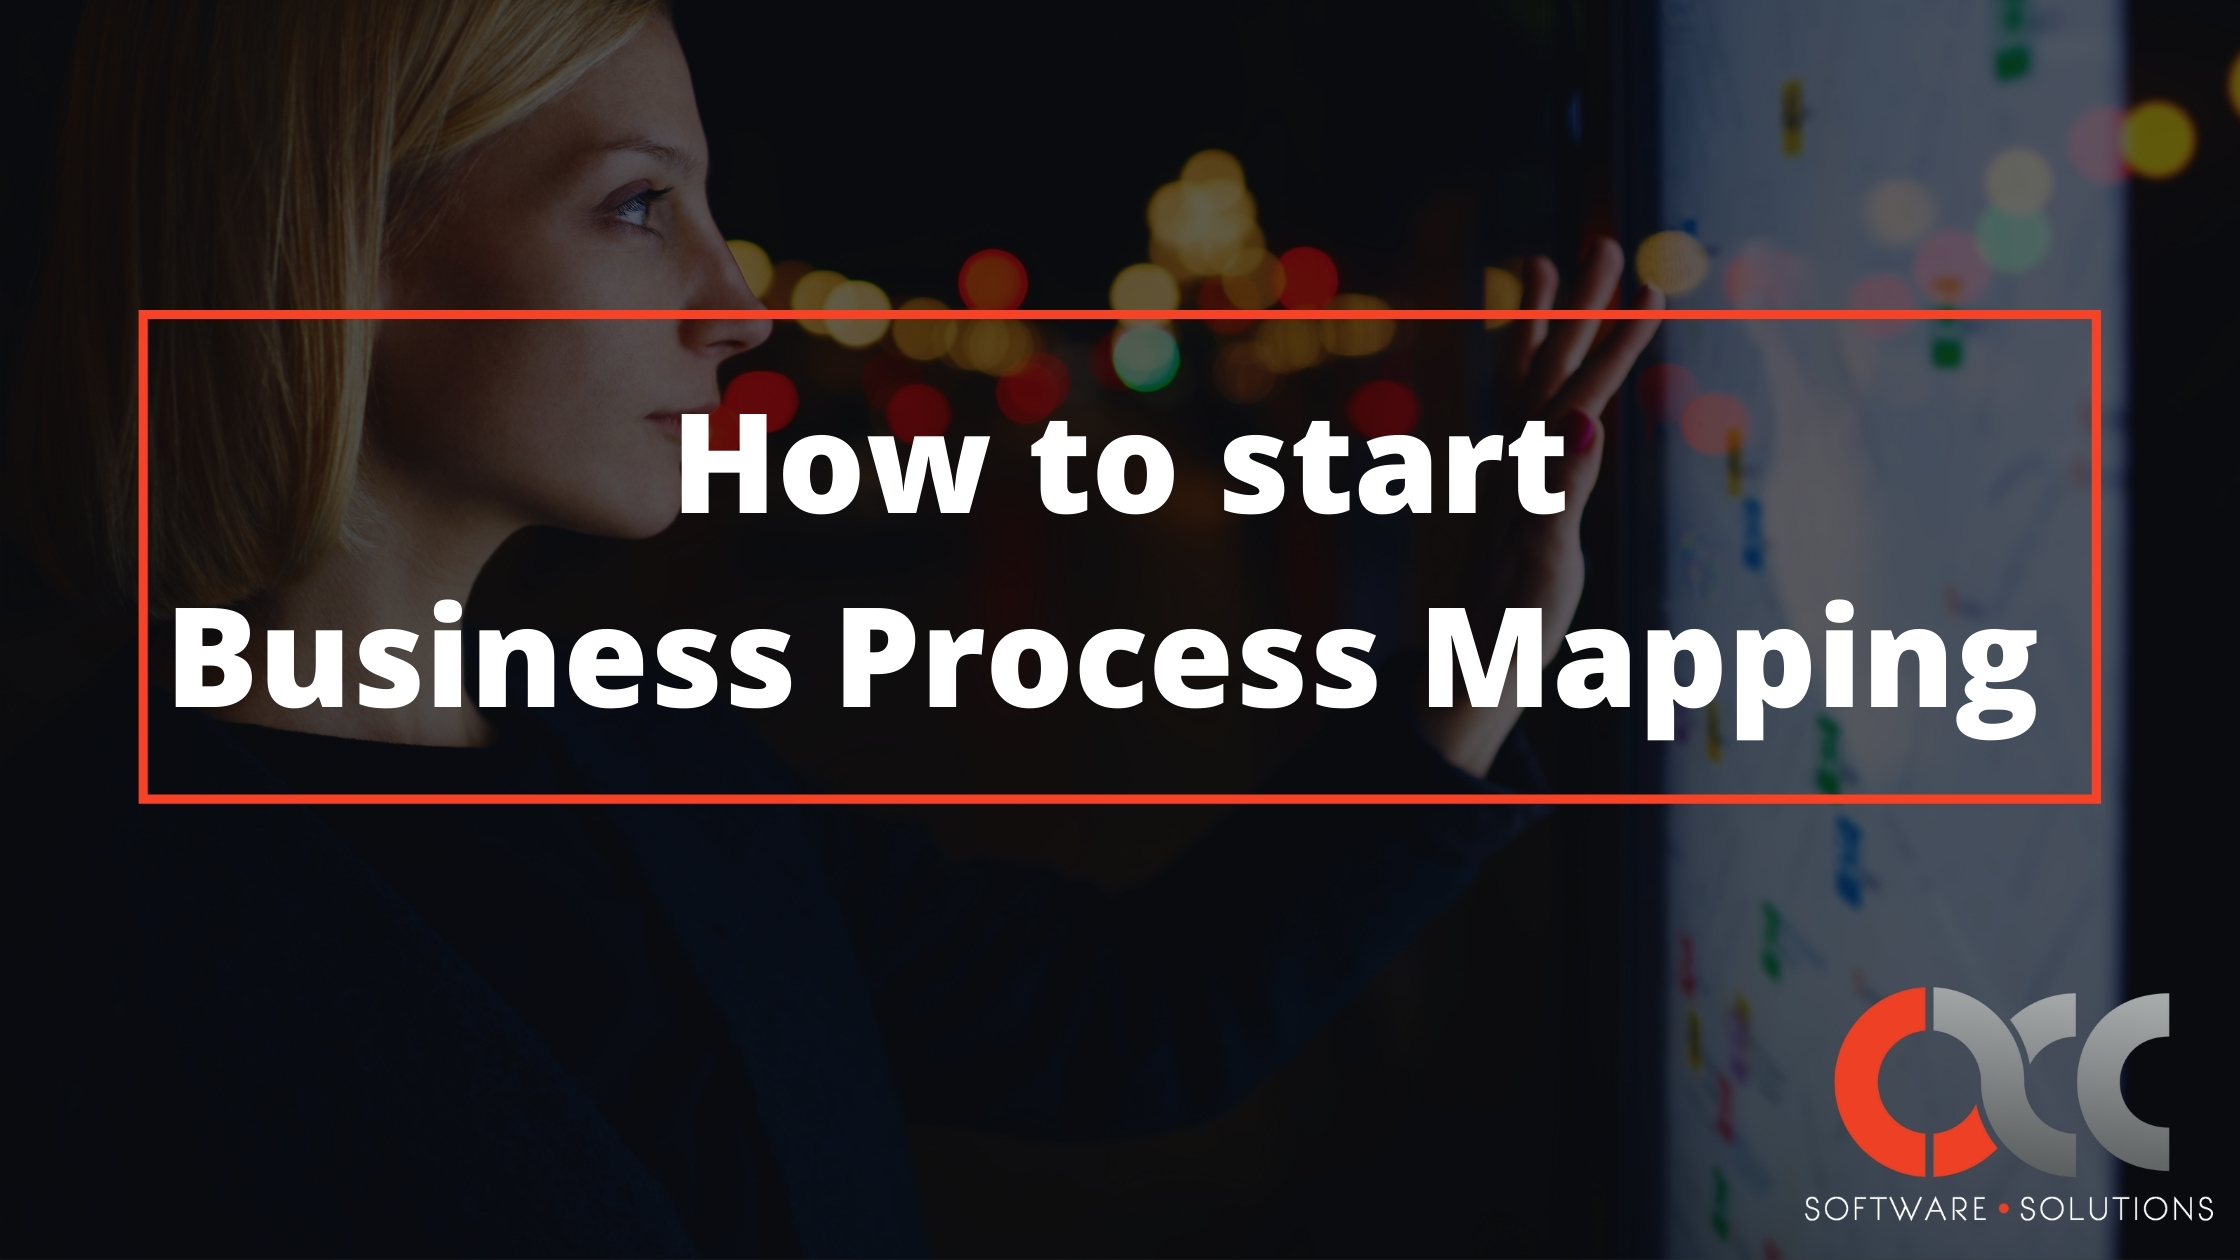 How to Start Business Process Mapping | ACC Software Solutions